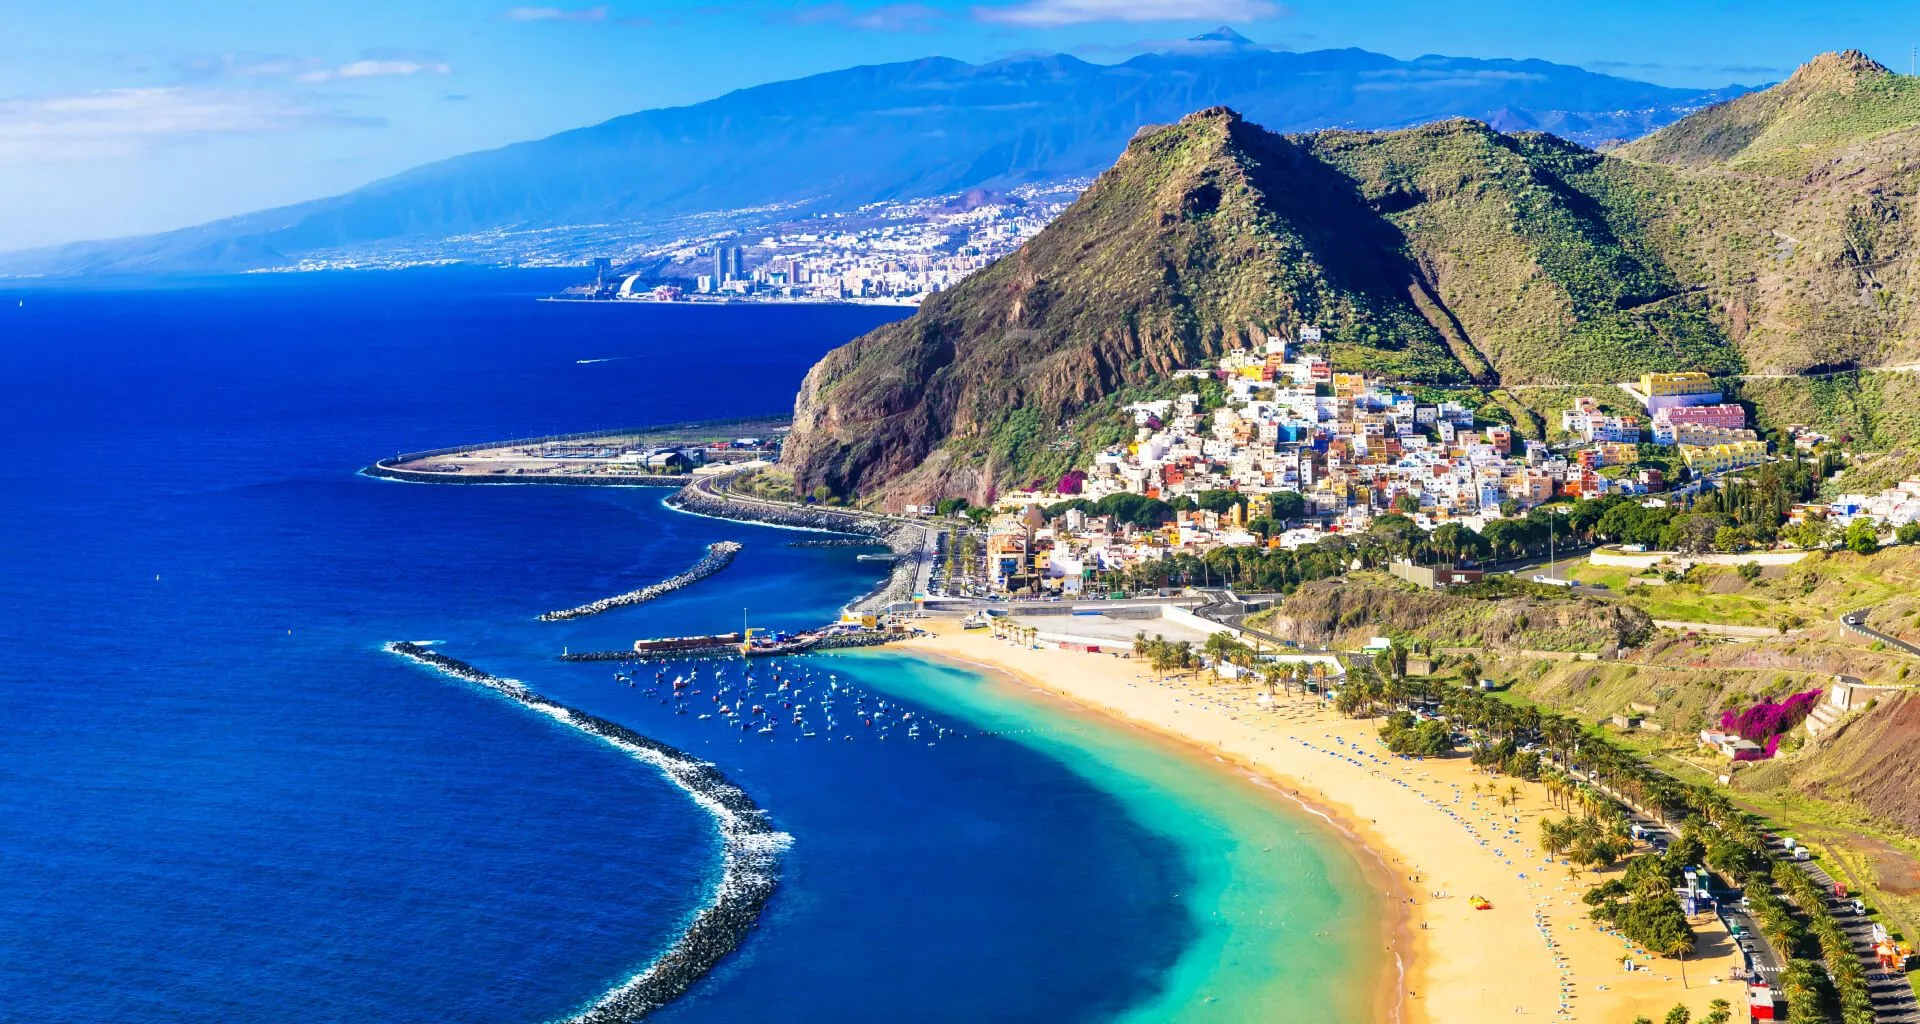 Tenerife in Spain, Europe | Surfing,Beaches - Rated 4.7